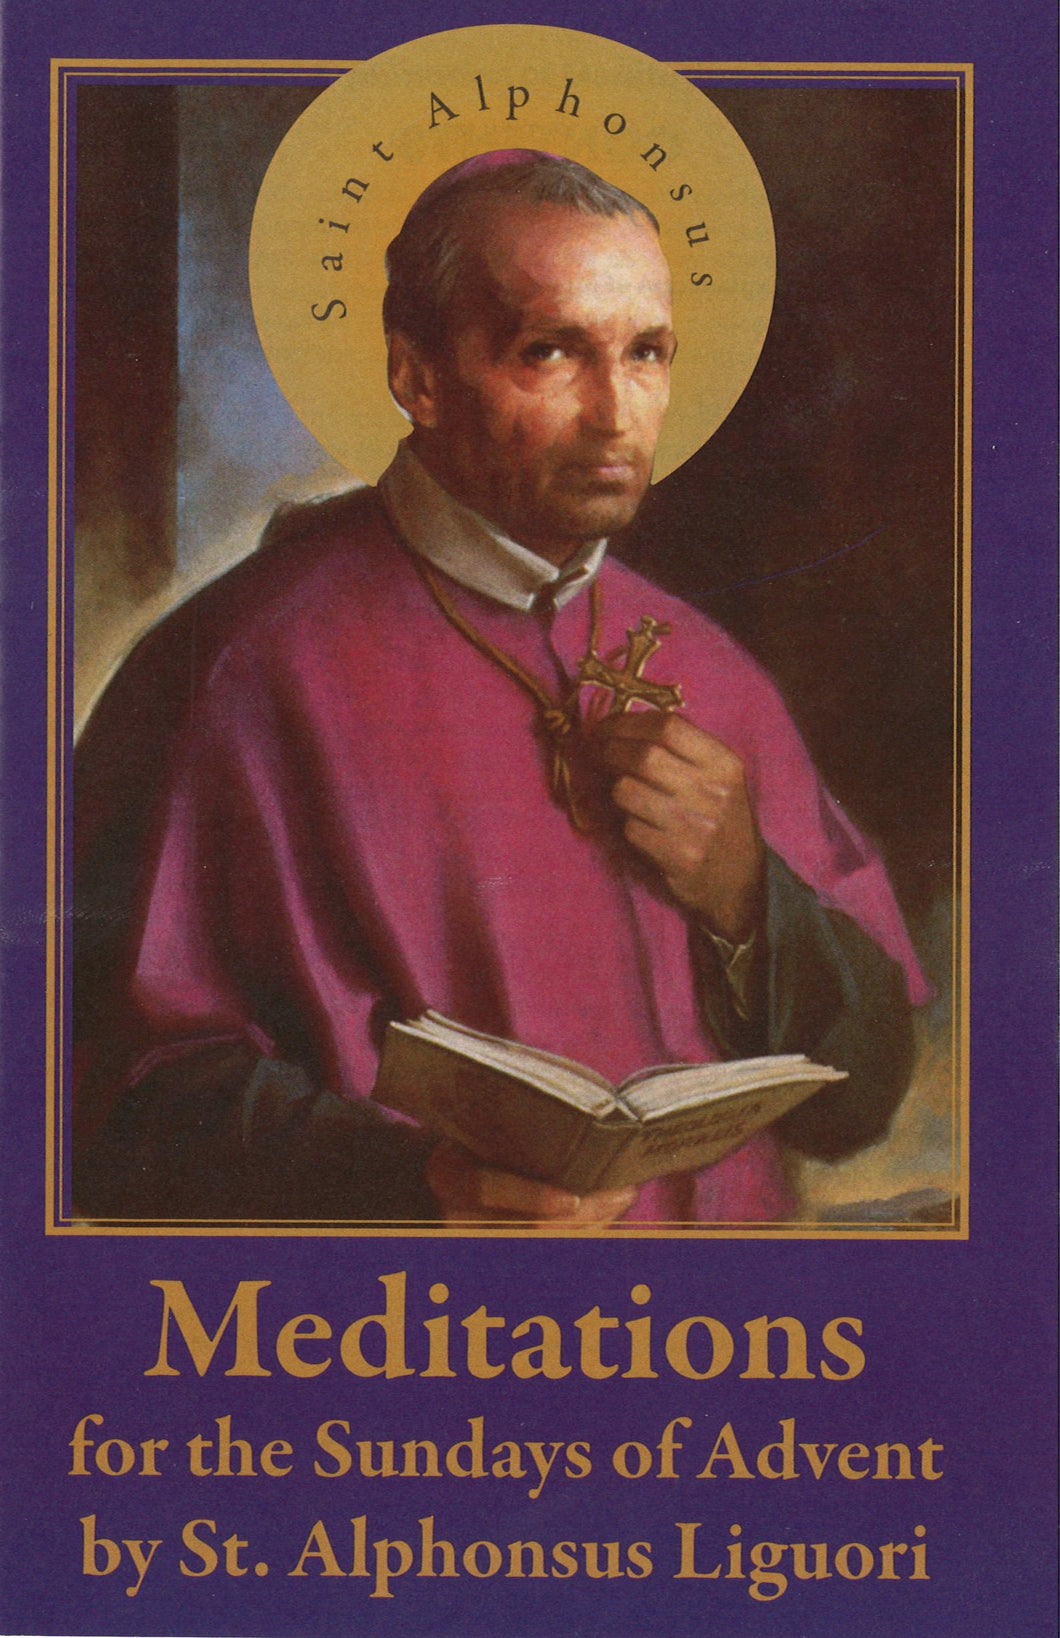 Meditations for the Sundays of Advent